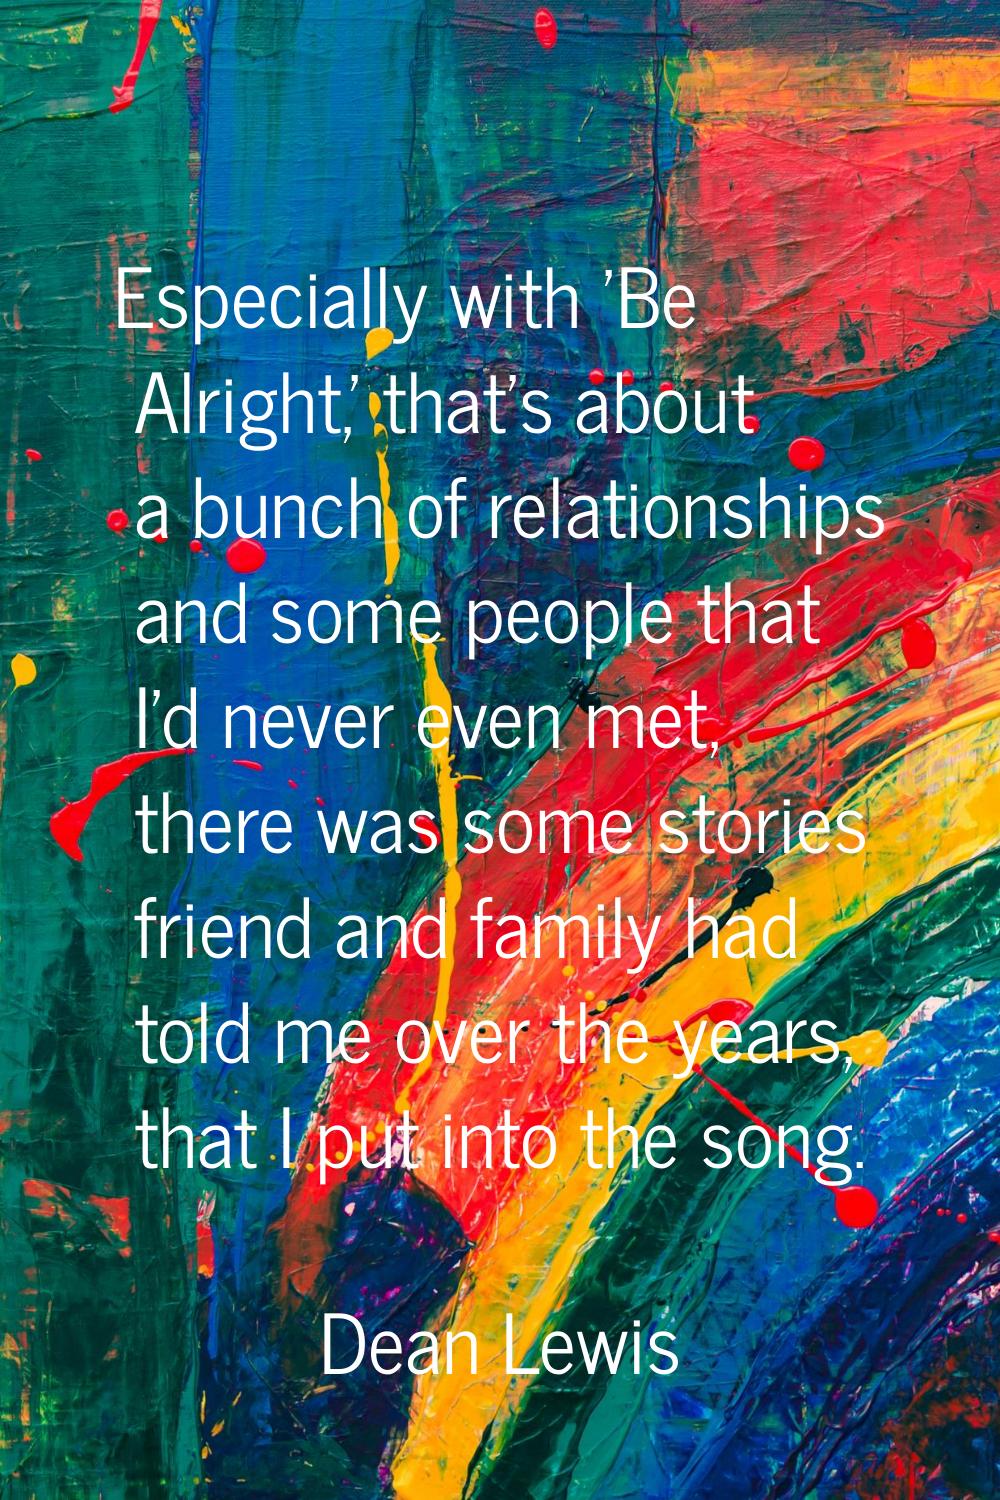 Especially with 'Be Alright,' that's about a bunch of relationships and some people that I'd never 